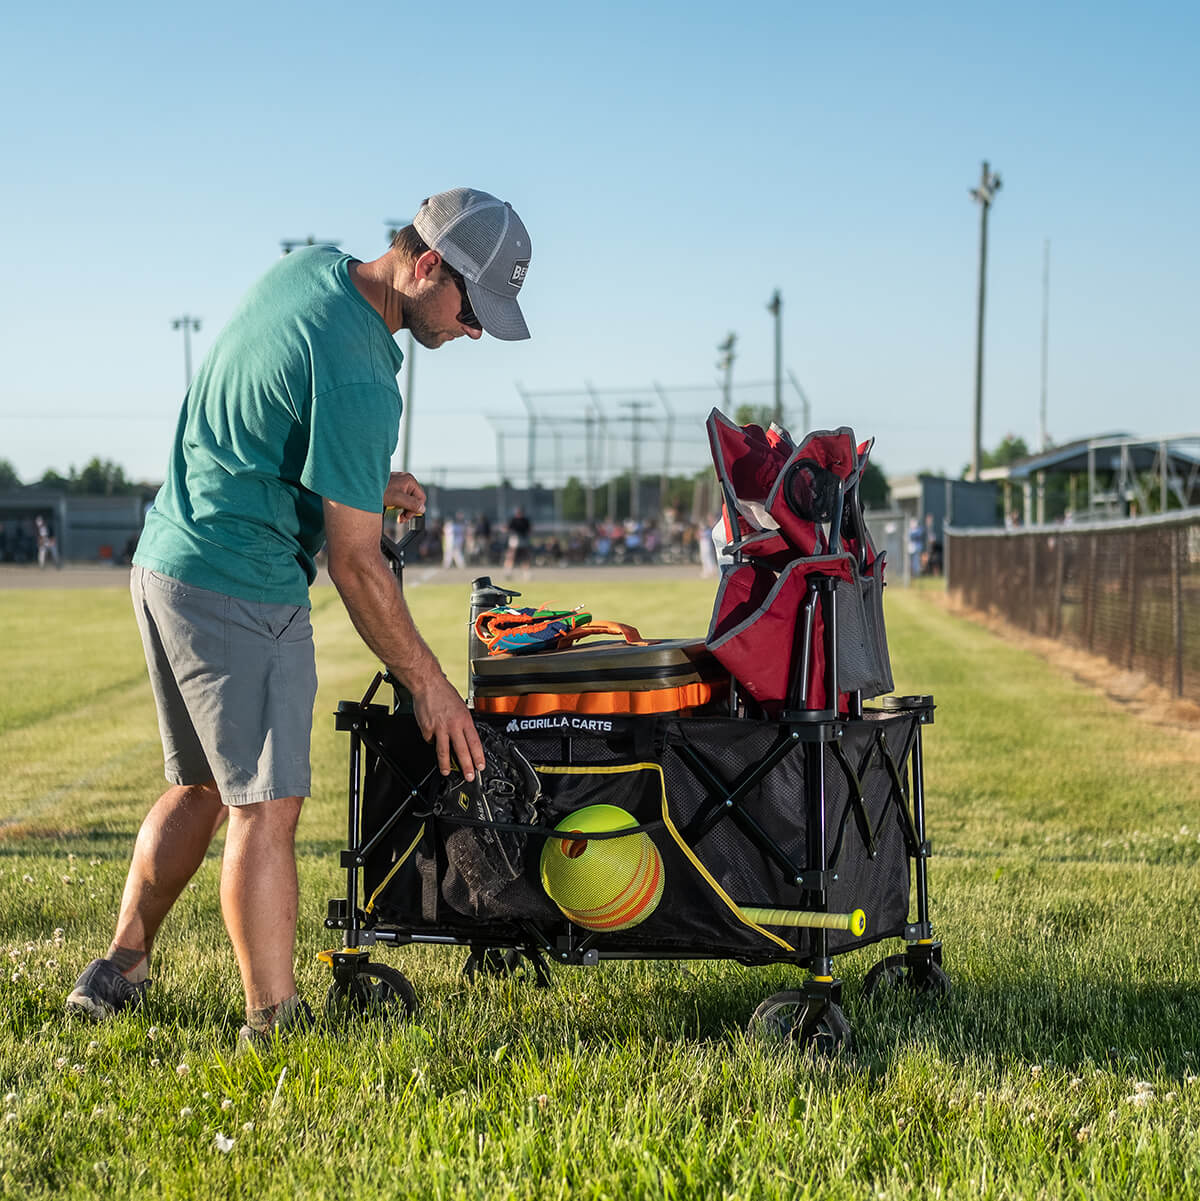 Man carrying equipment to watch a game